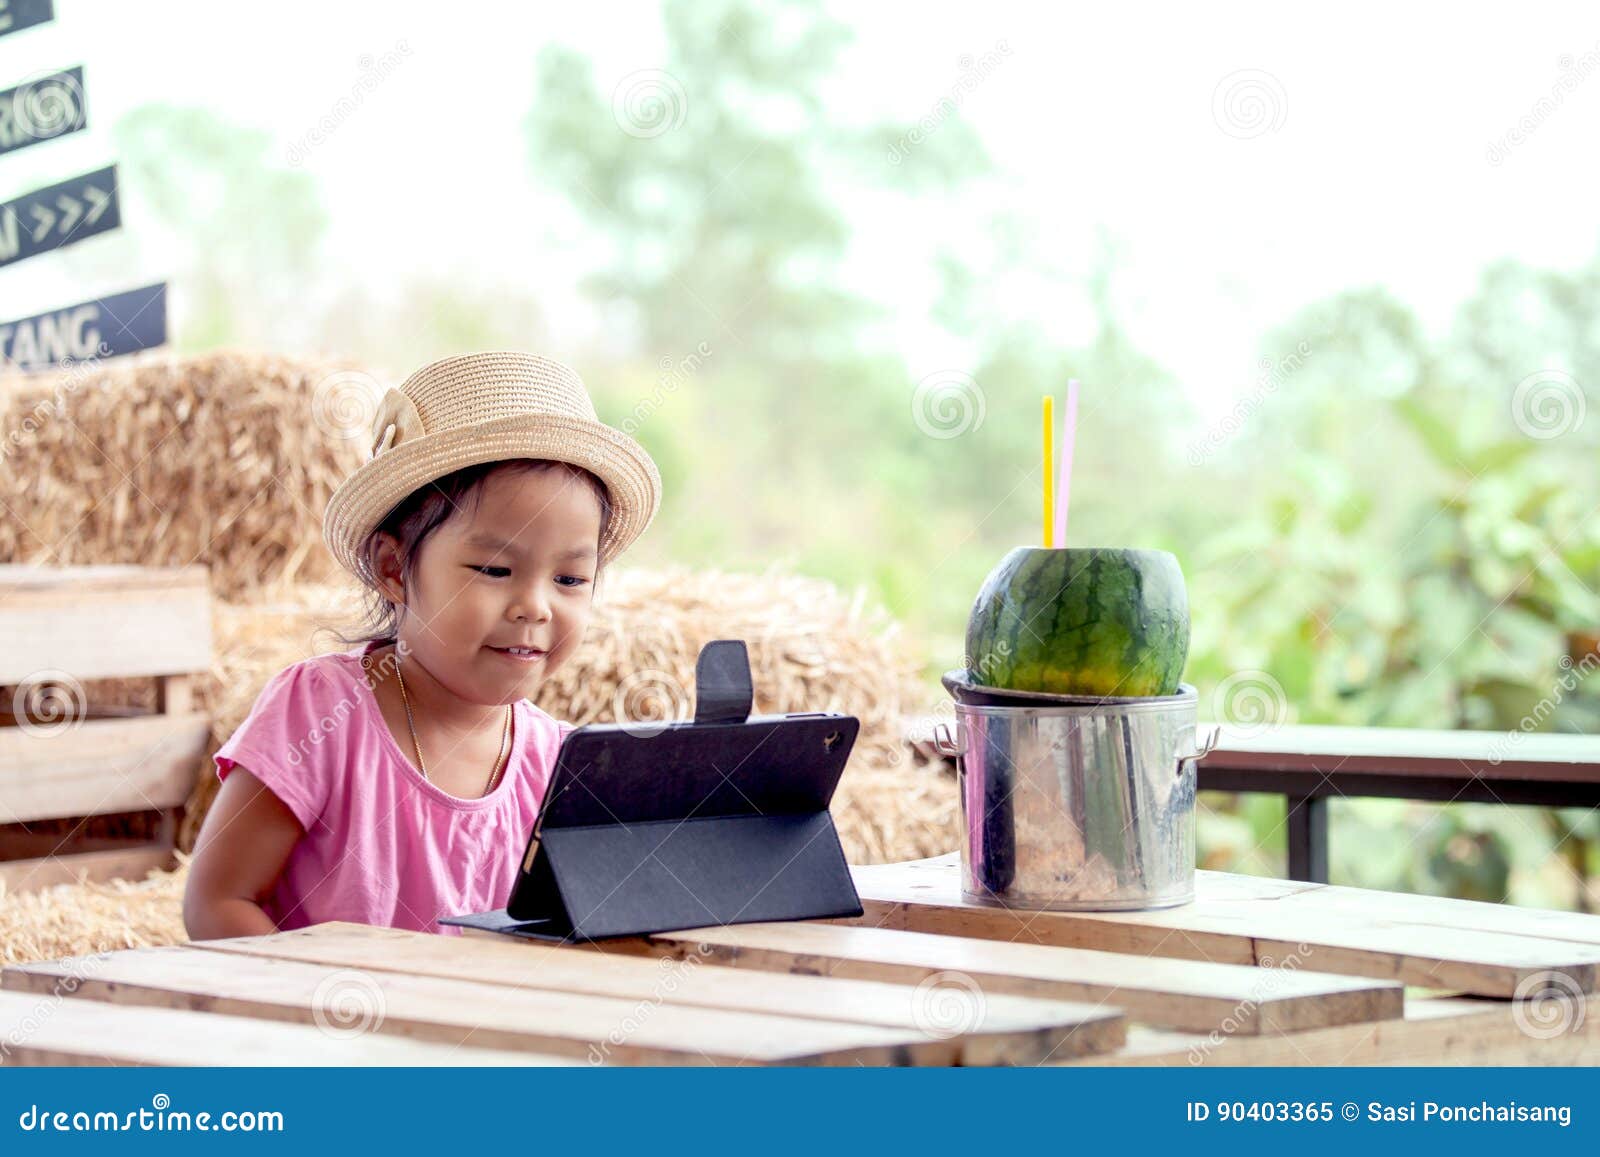 Asian Little Girl Is Playing Ipad Tablet Stock Image 